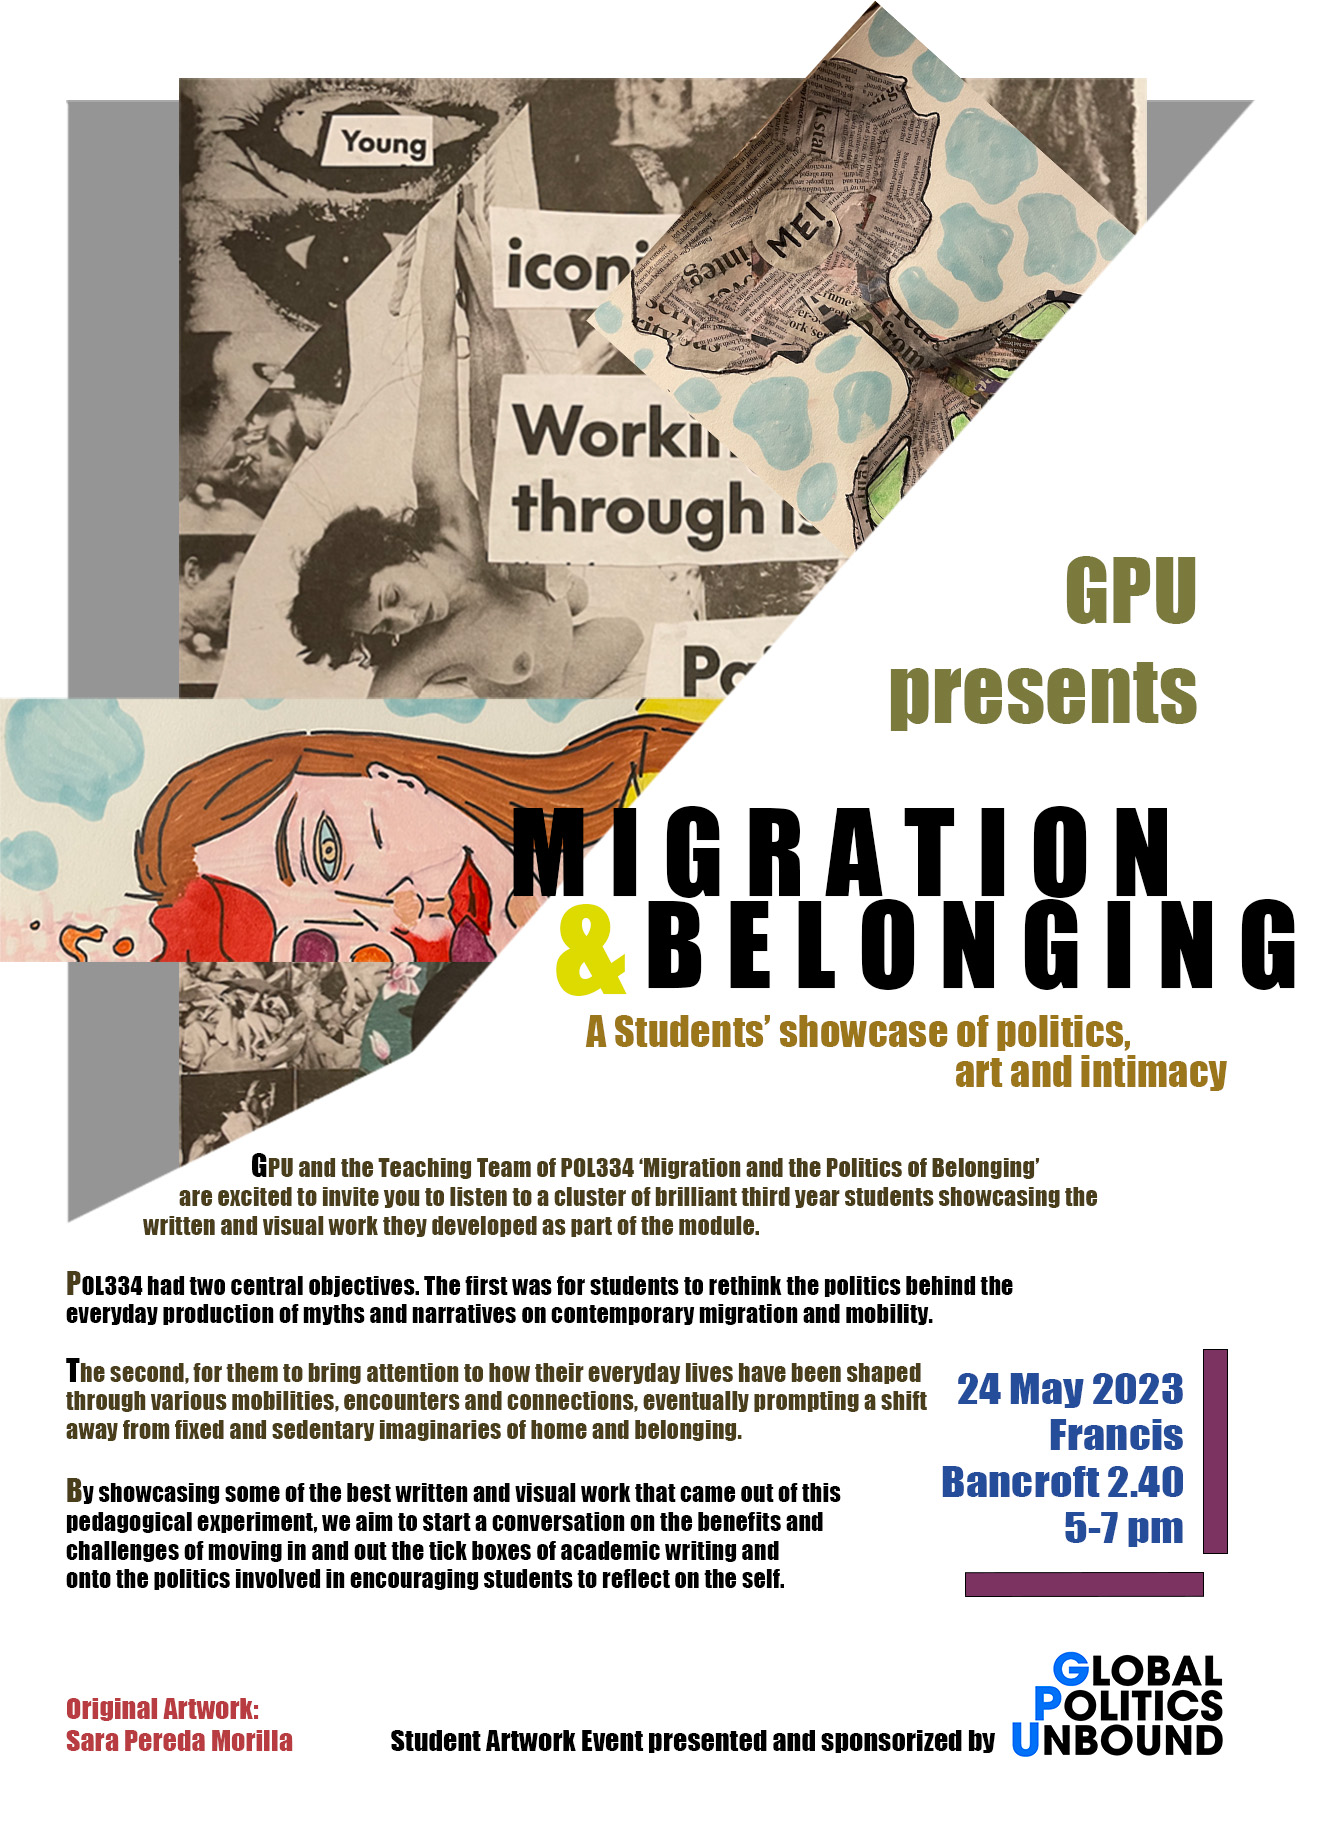 Migration & Belonging: A students' showcase of politics, art and intimacy